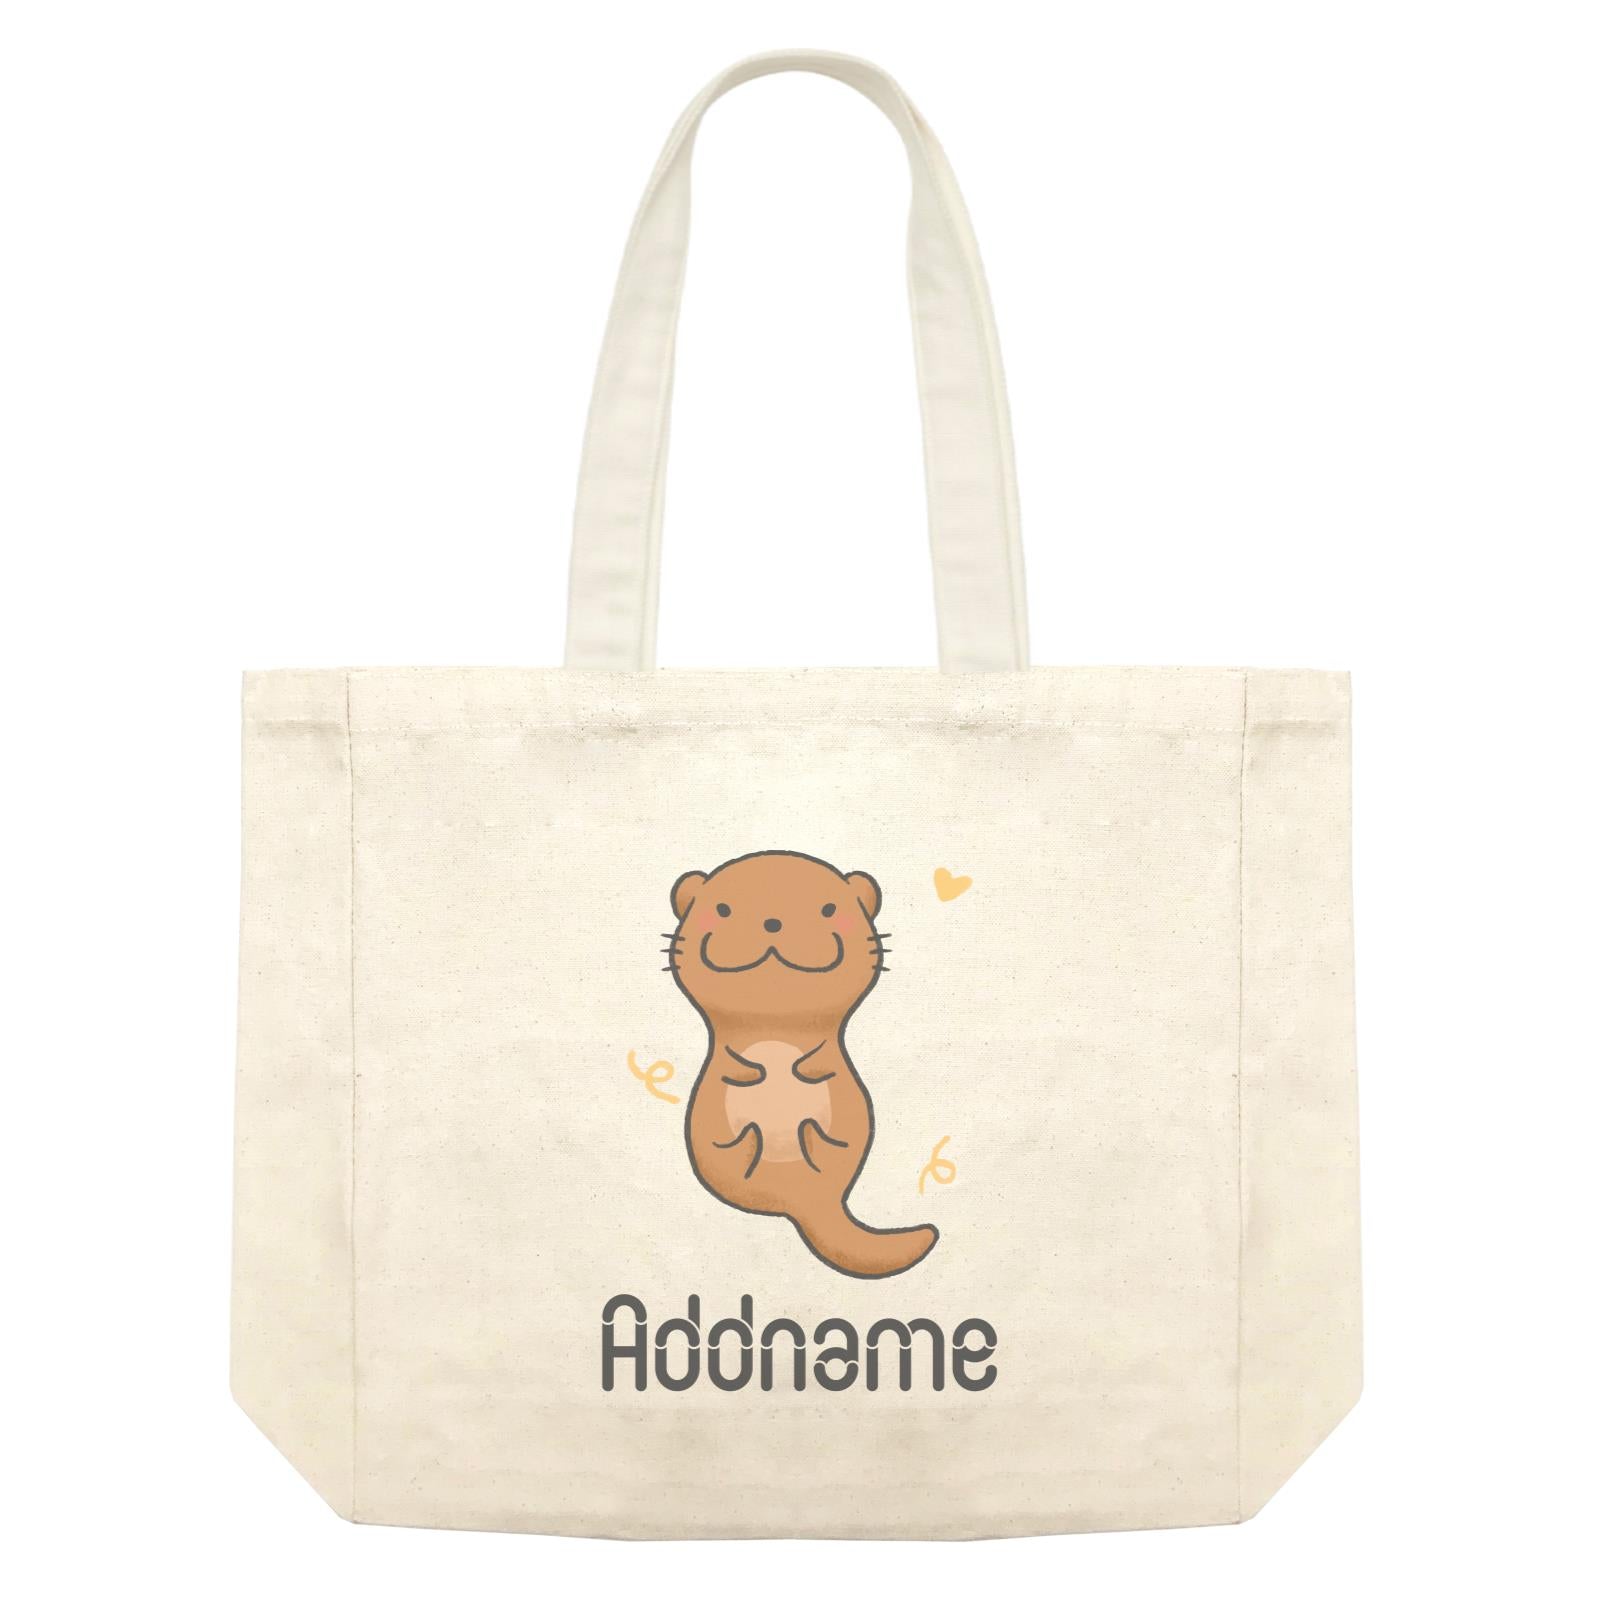 Cute Hand Drawn Style Otter Addname Shopping Bag